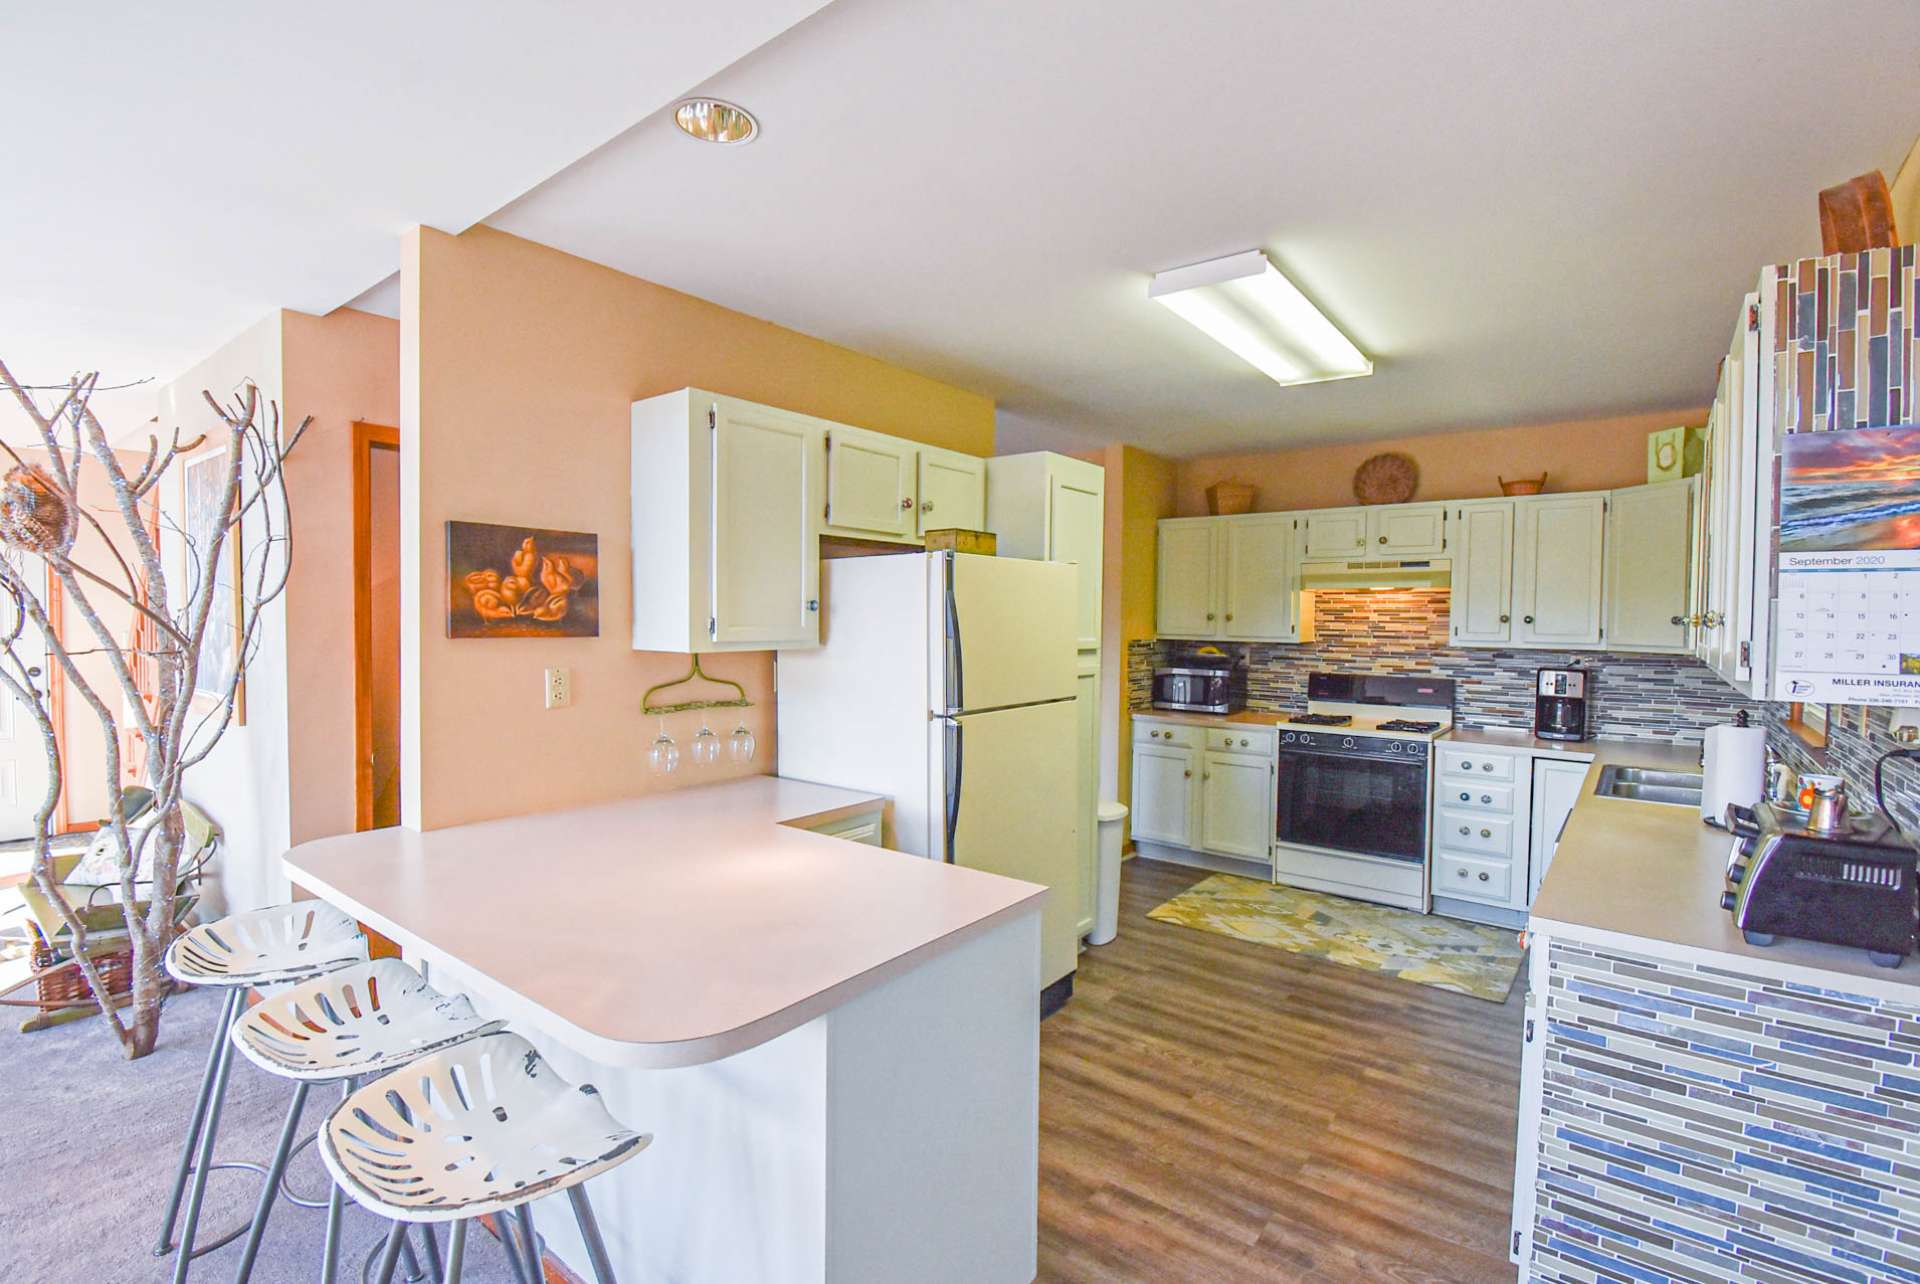 This spacious kitchen features ample work and storage space including a bar with seating.